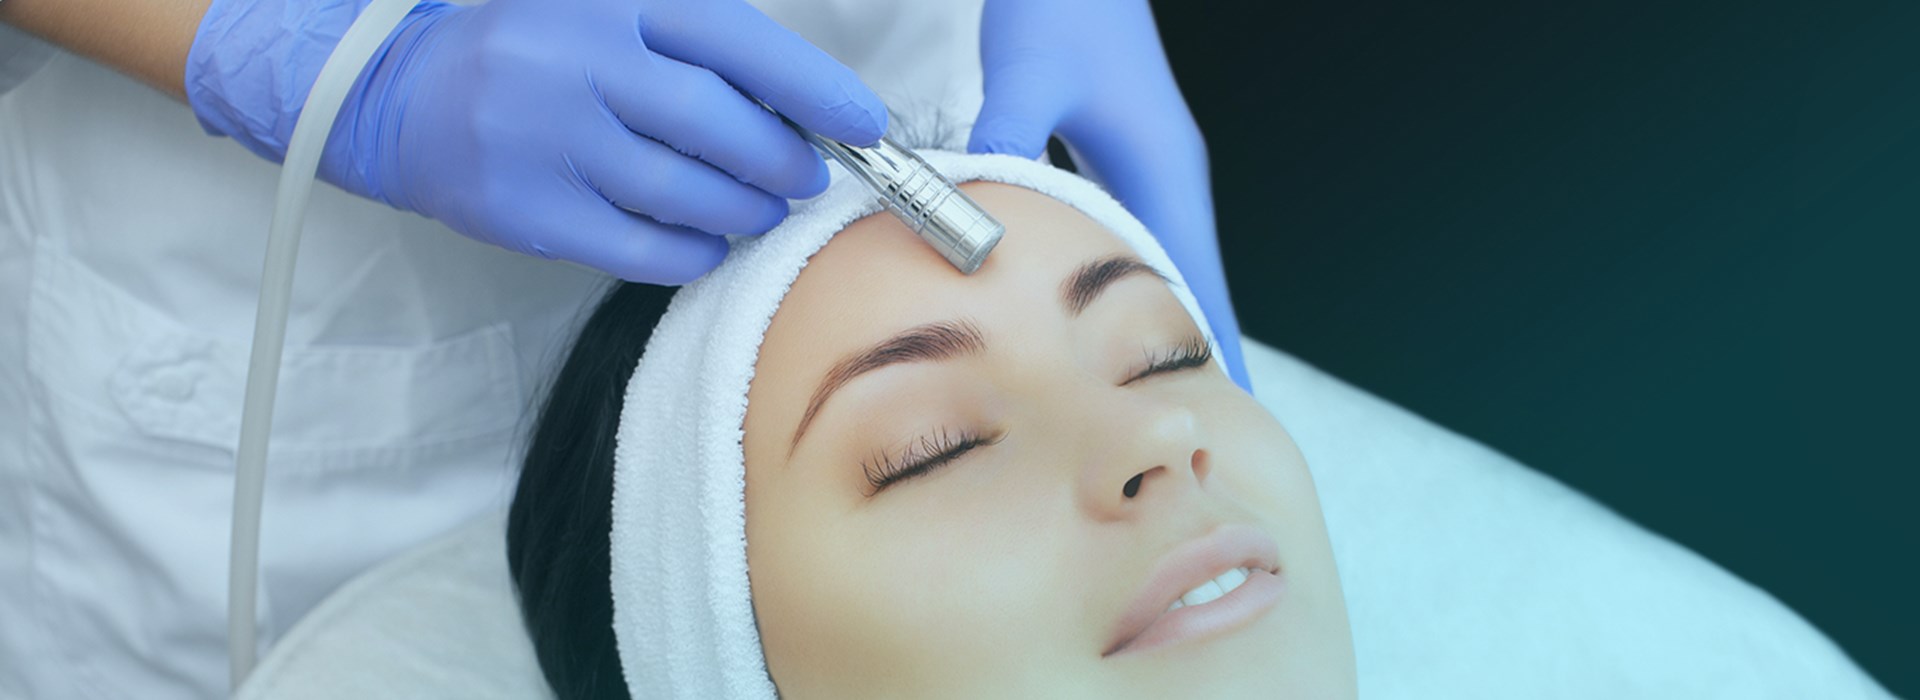 Prejuvenation and Rejuvenation Treatments, Services, and Products at MARC